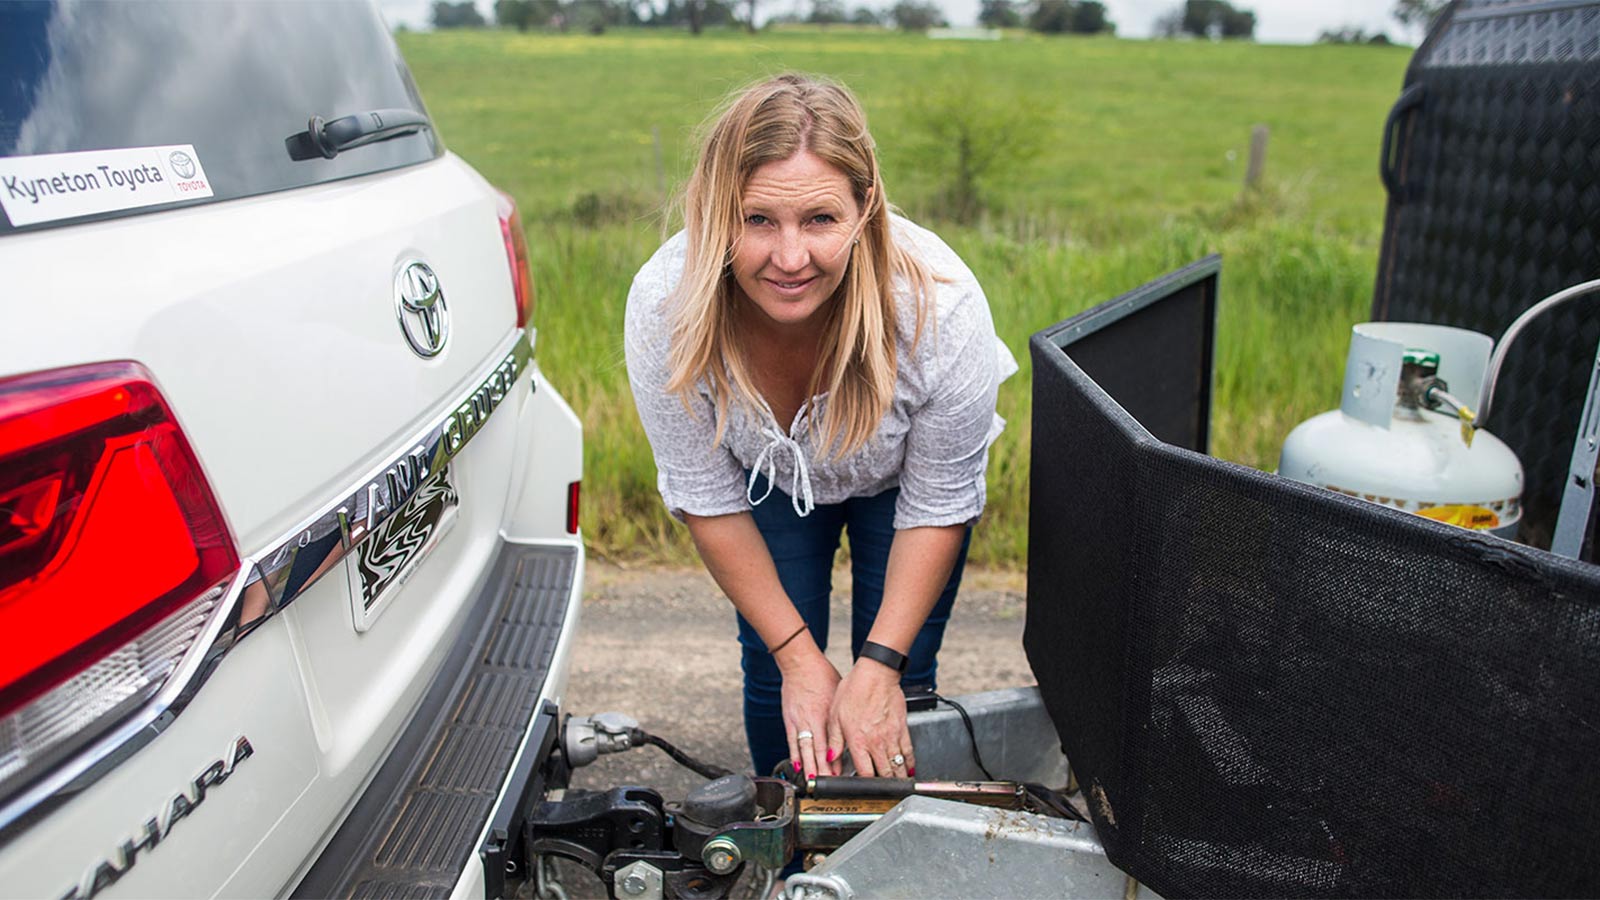 Smiling woman fixing a tow hitch attached to her white Kyneton Toyota.